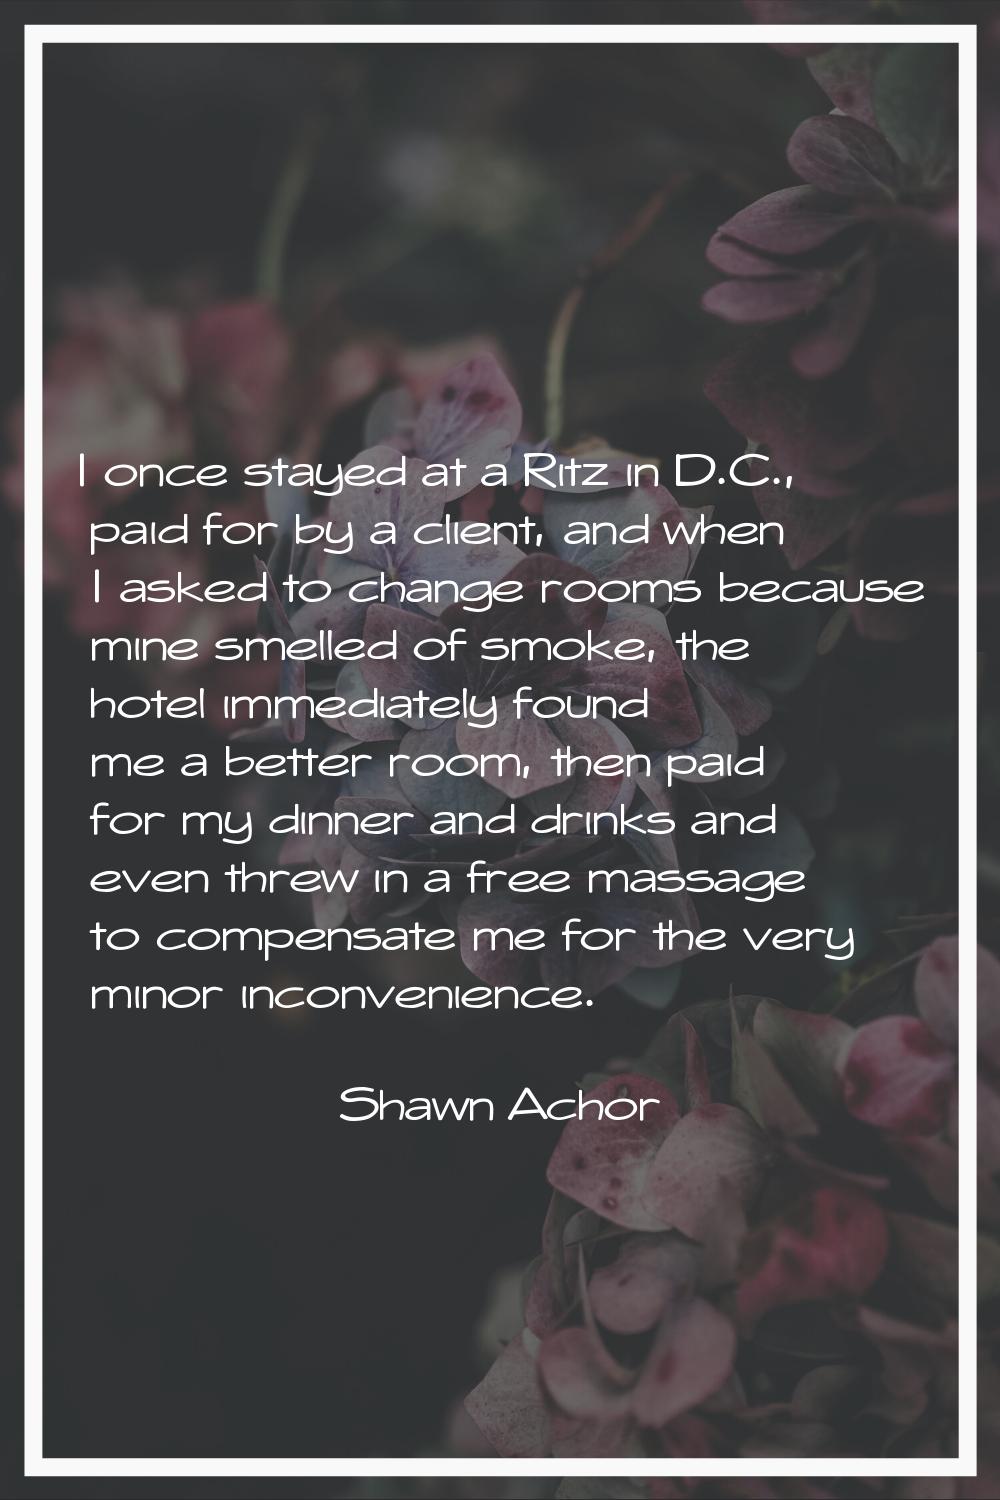 I once stayed at a Ritz in D.C., paid for by a client, and when I asked to change rooms because min